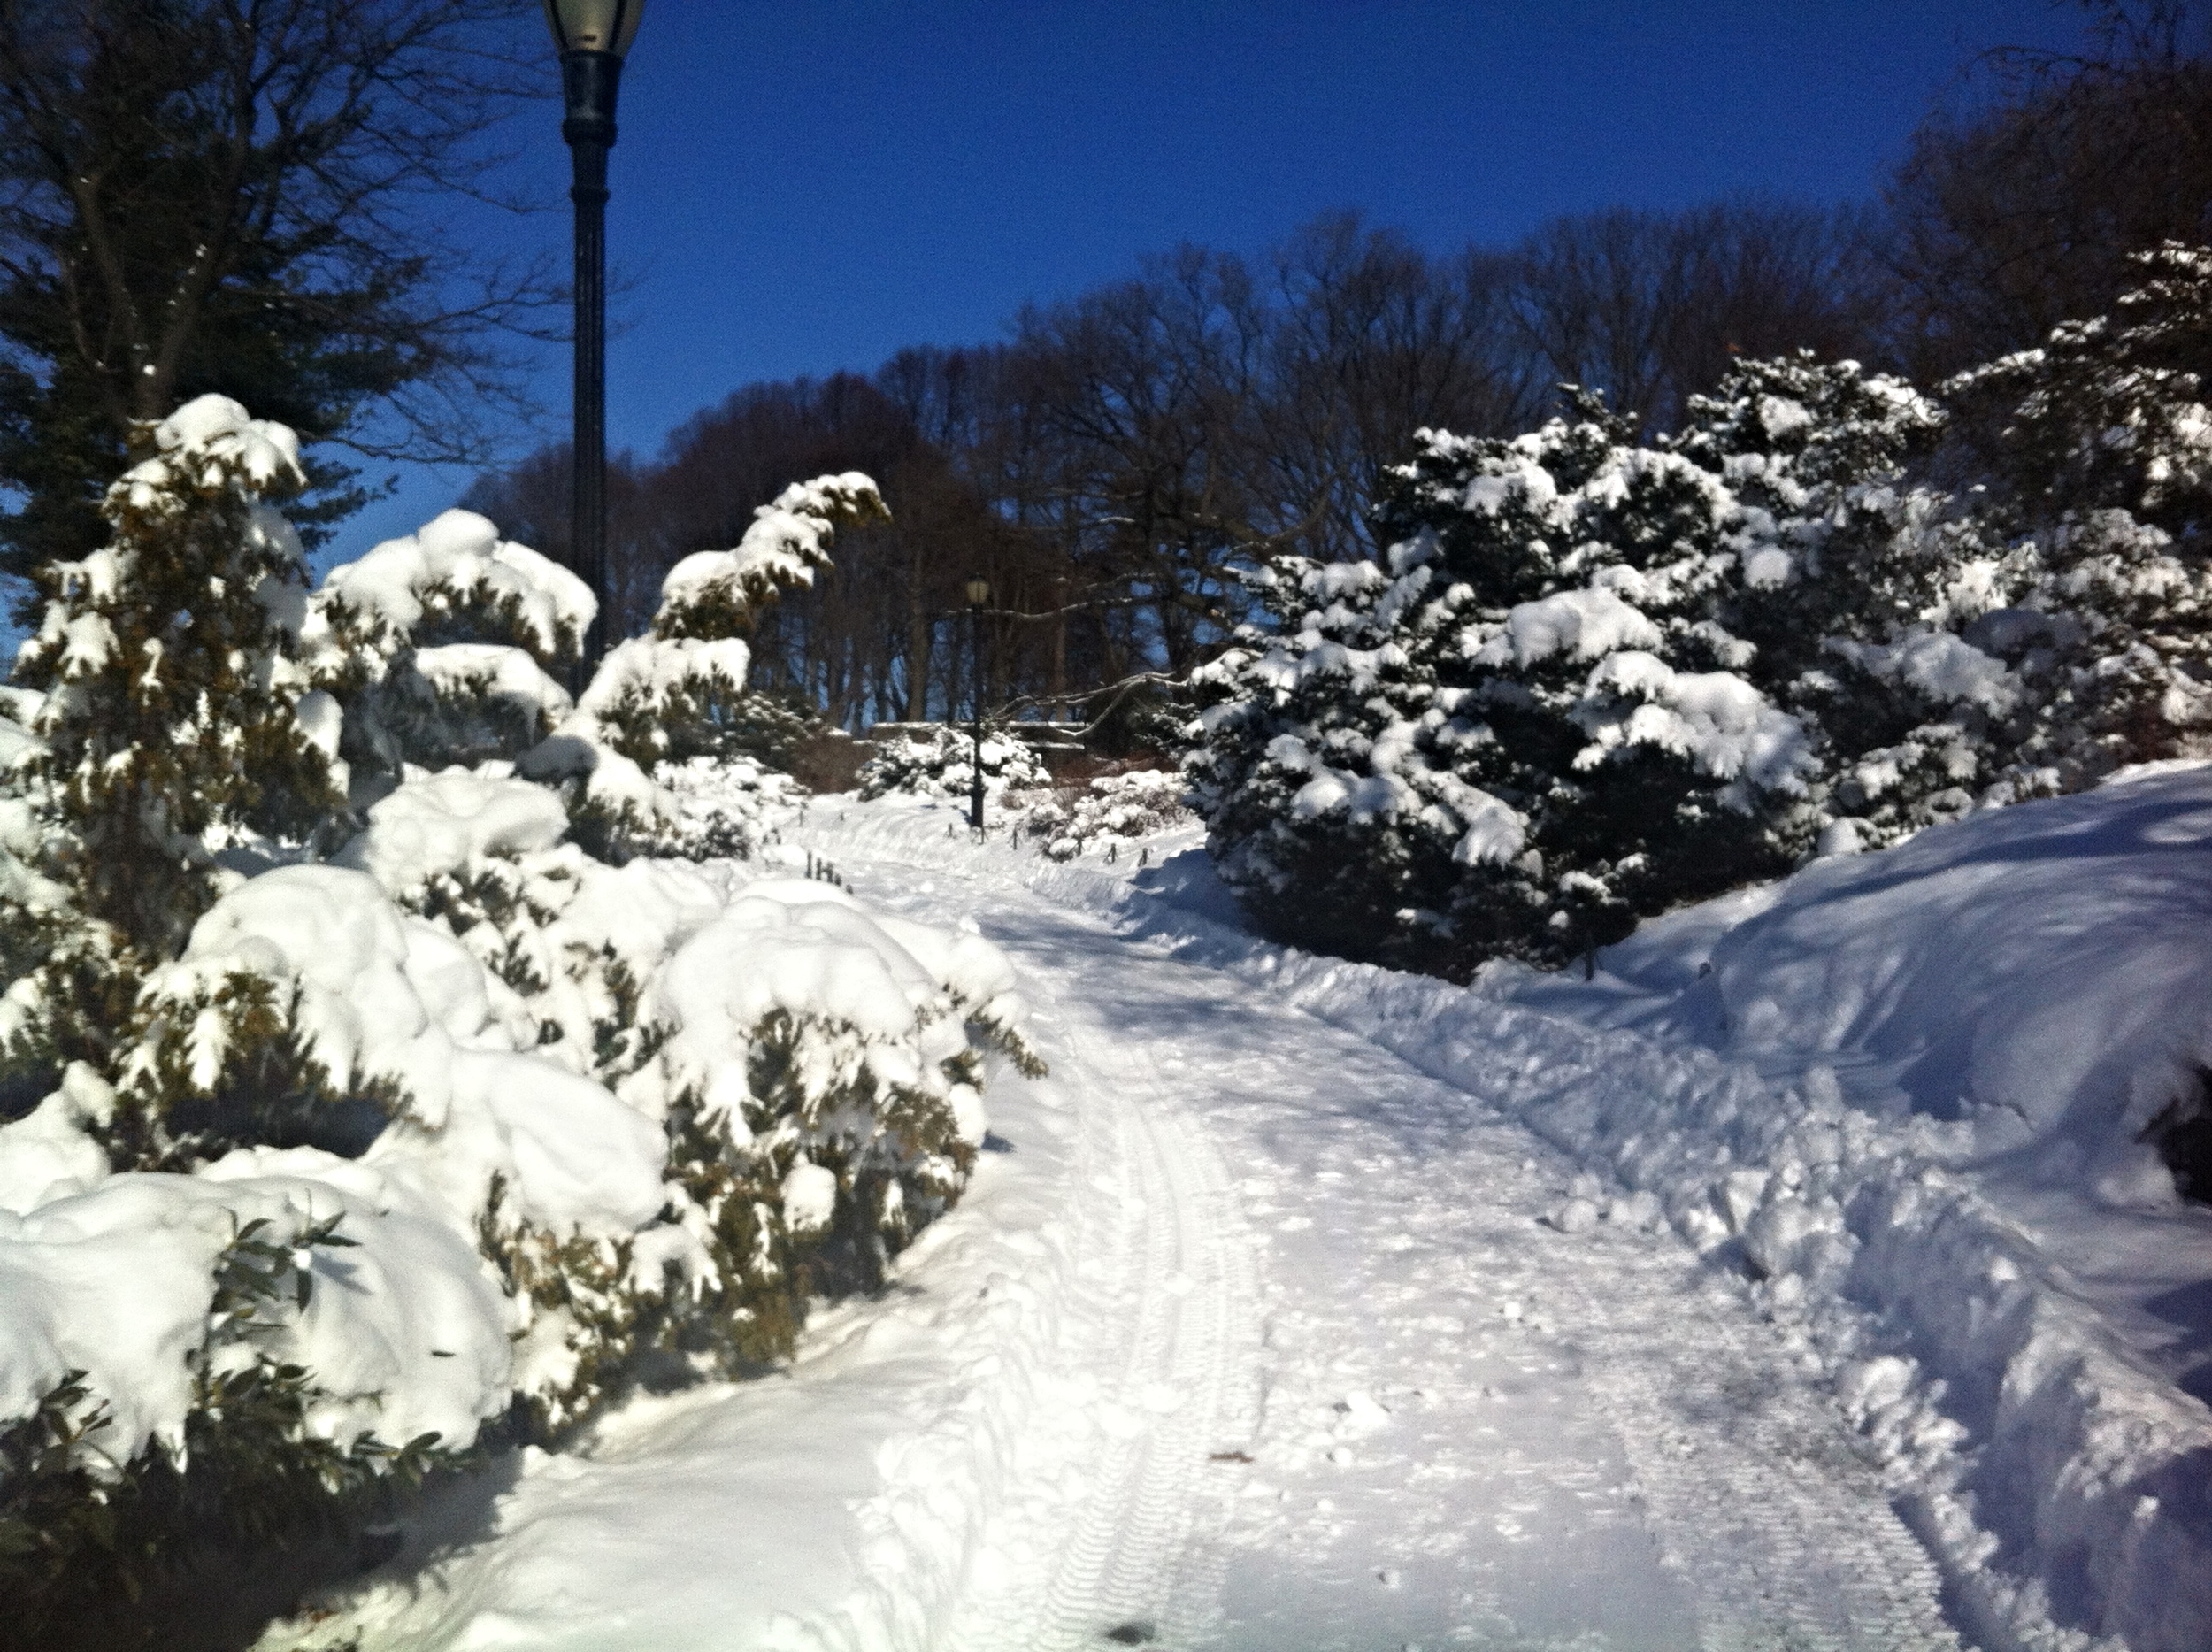 My morning walk in Fort Tryon